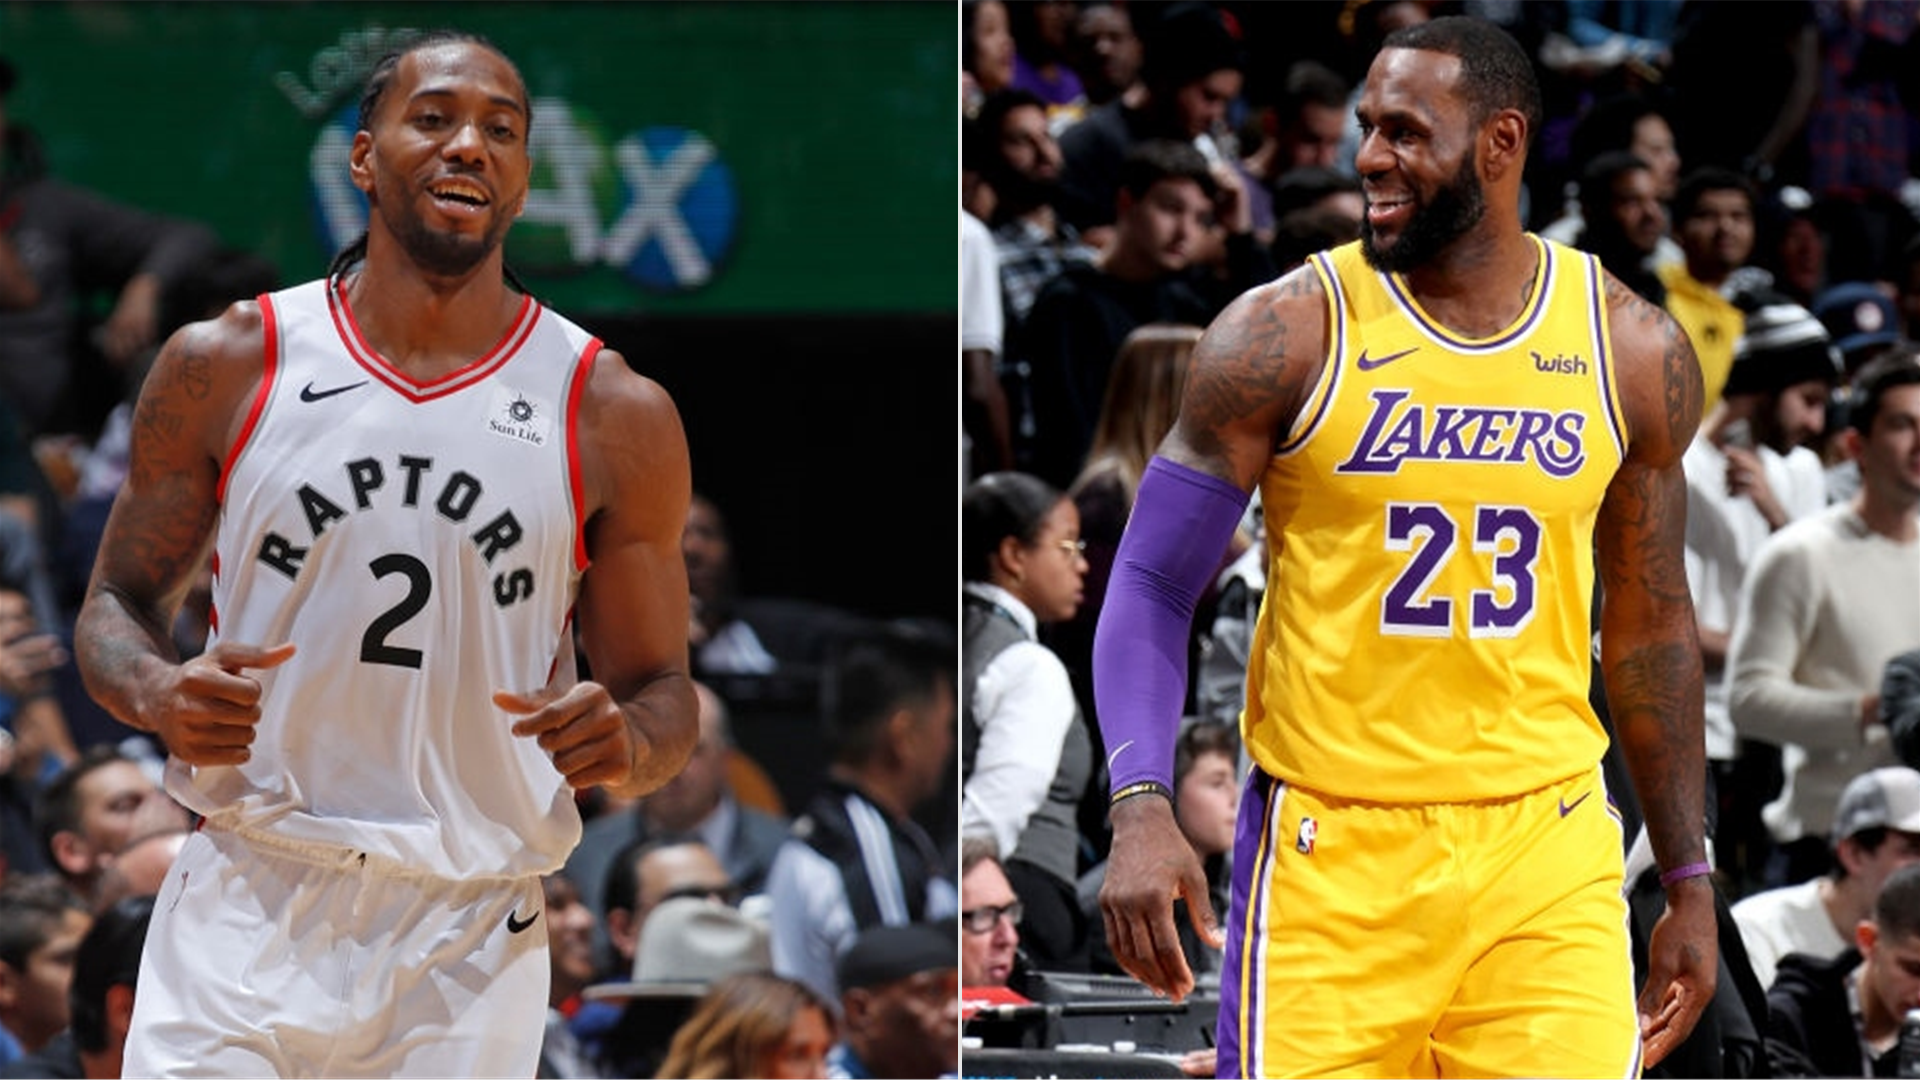 NBA All-Star Game 2019: Takeaways from the third fan vote results | NBA.com1920 x 1080